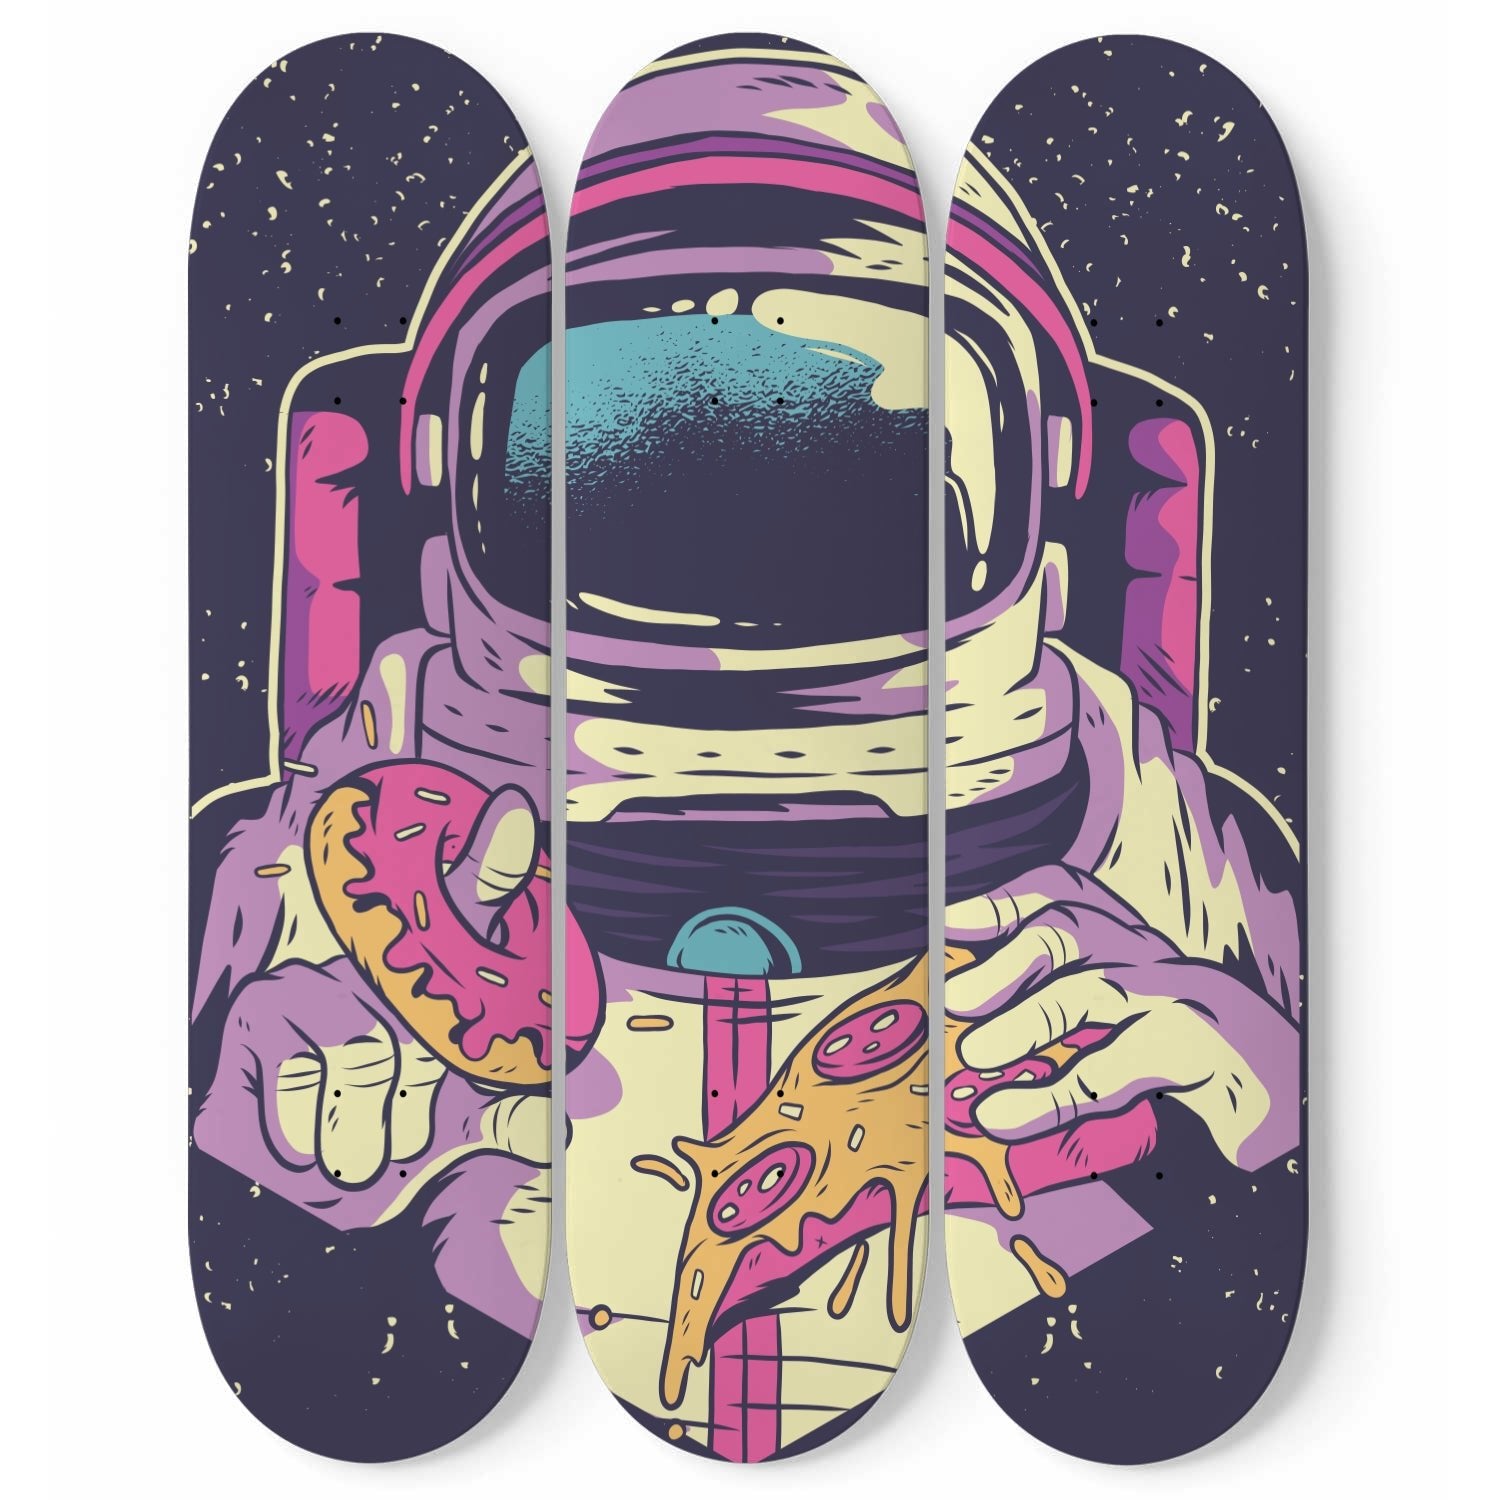 Space Odyssey #12.0 - Skater Wall